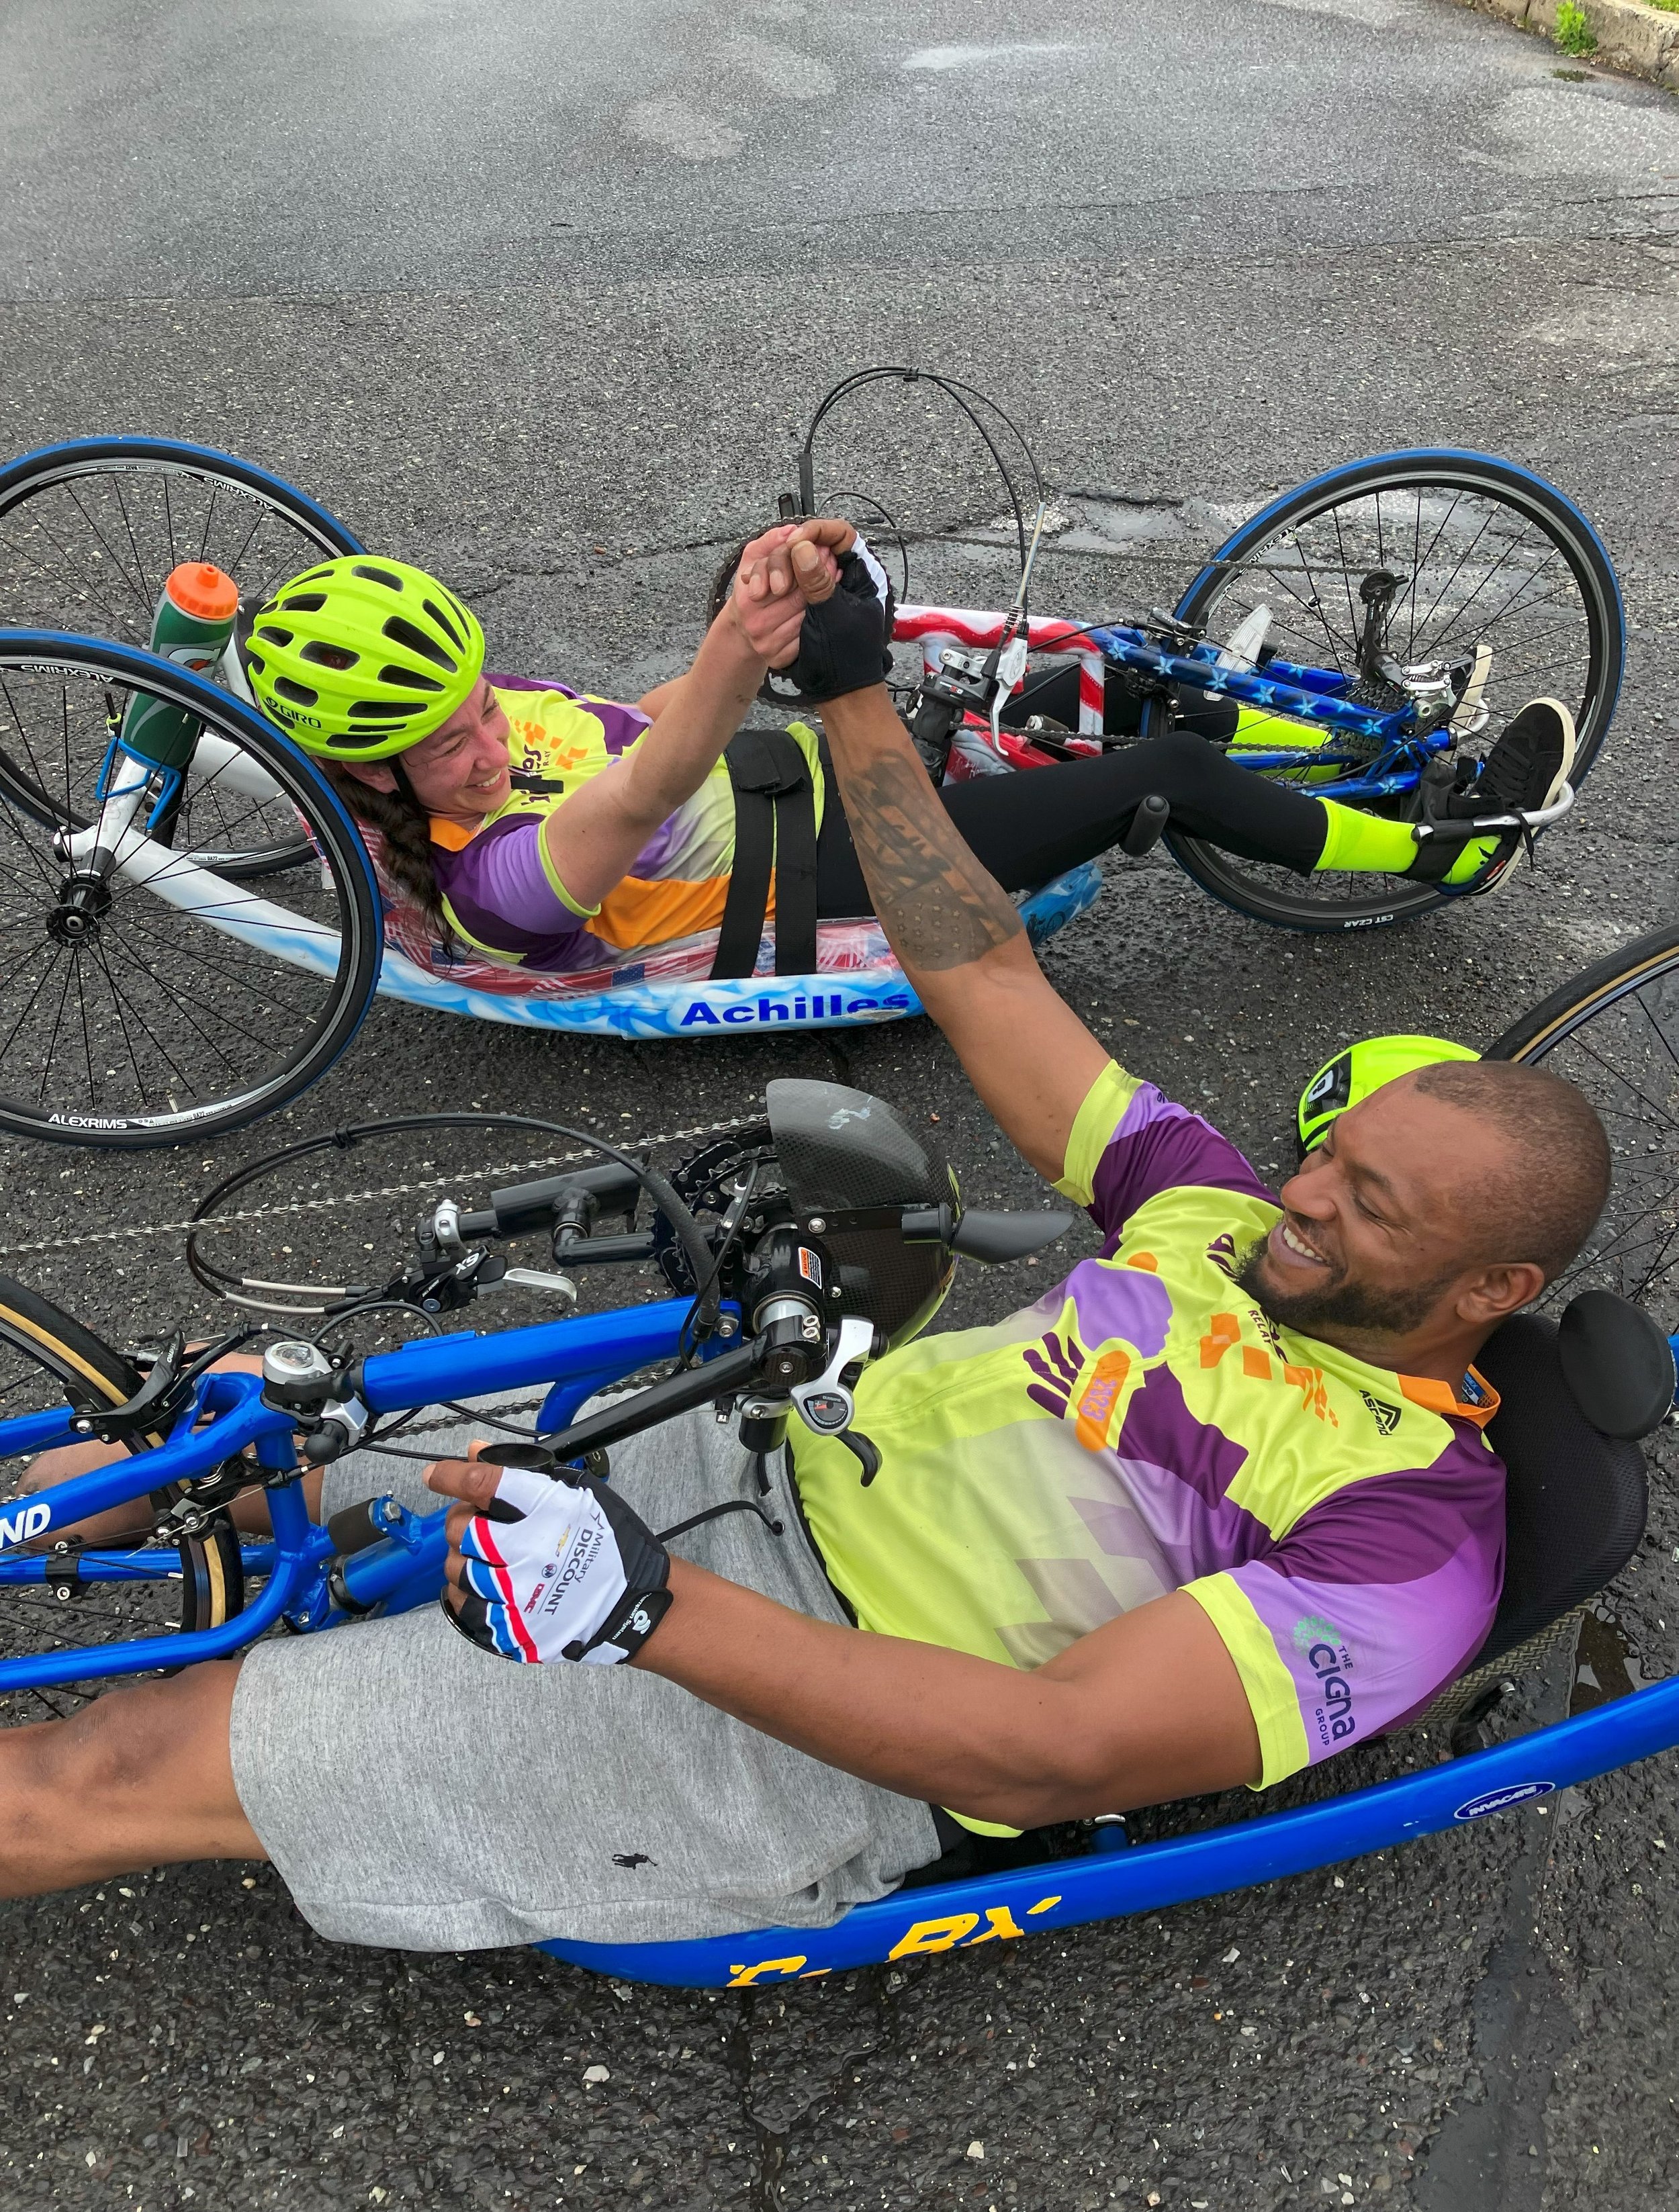  Achilles handcycle athletes holding hands while sitting on their handcycles  